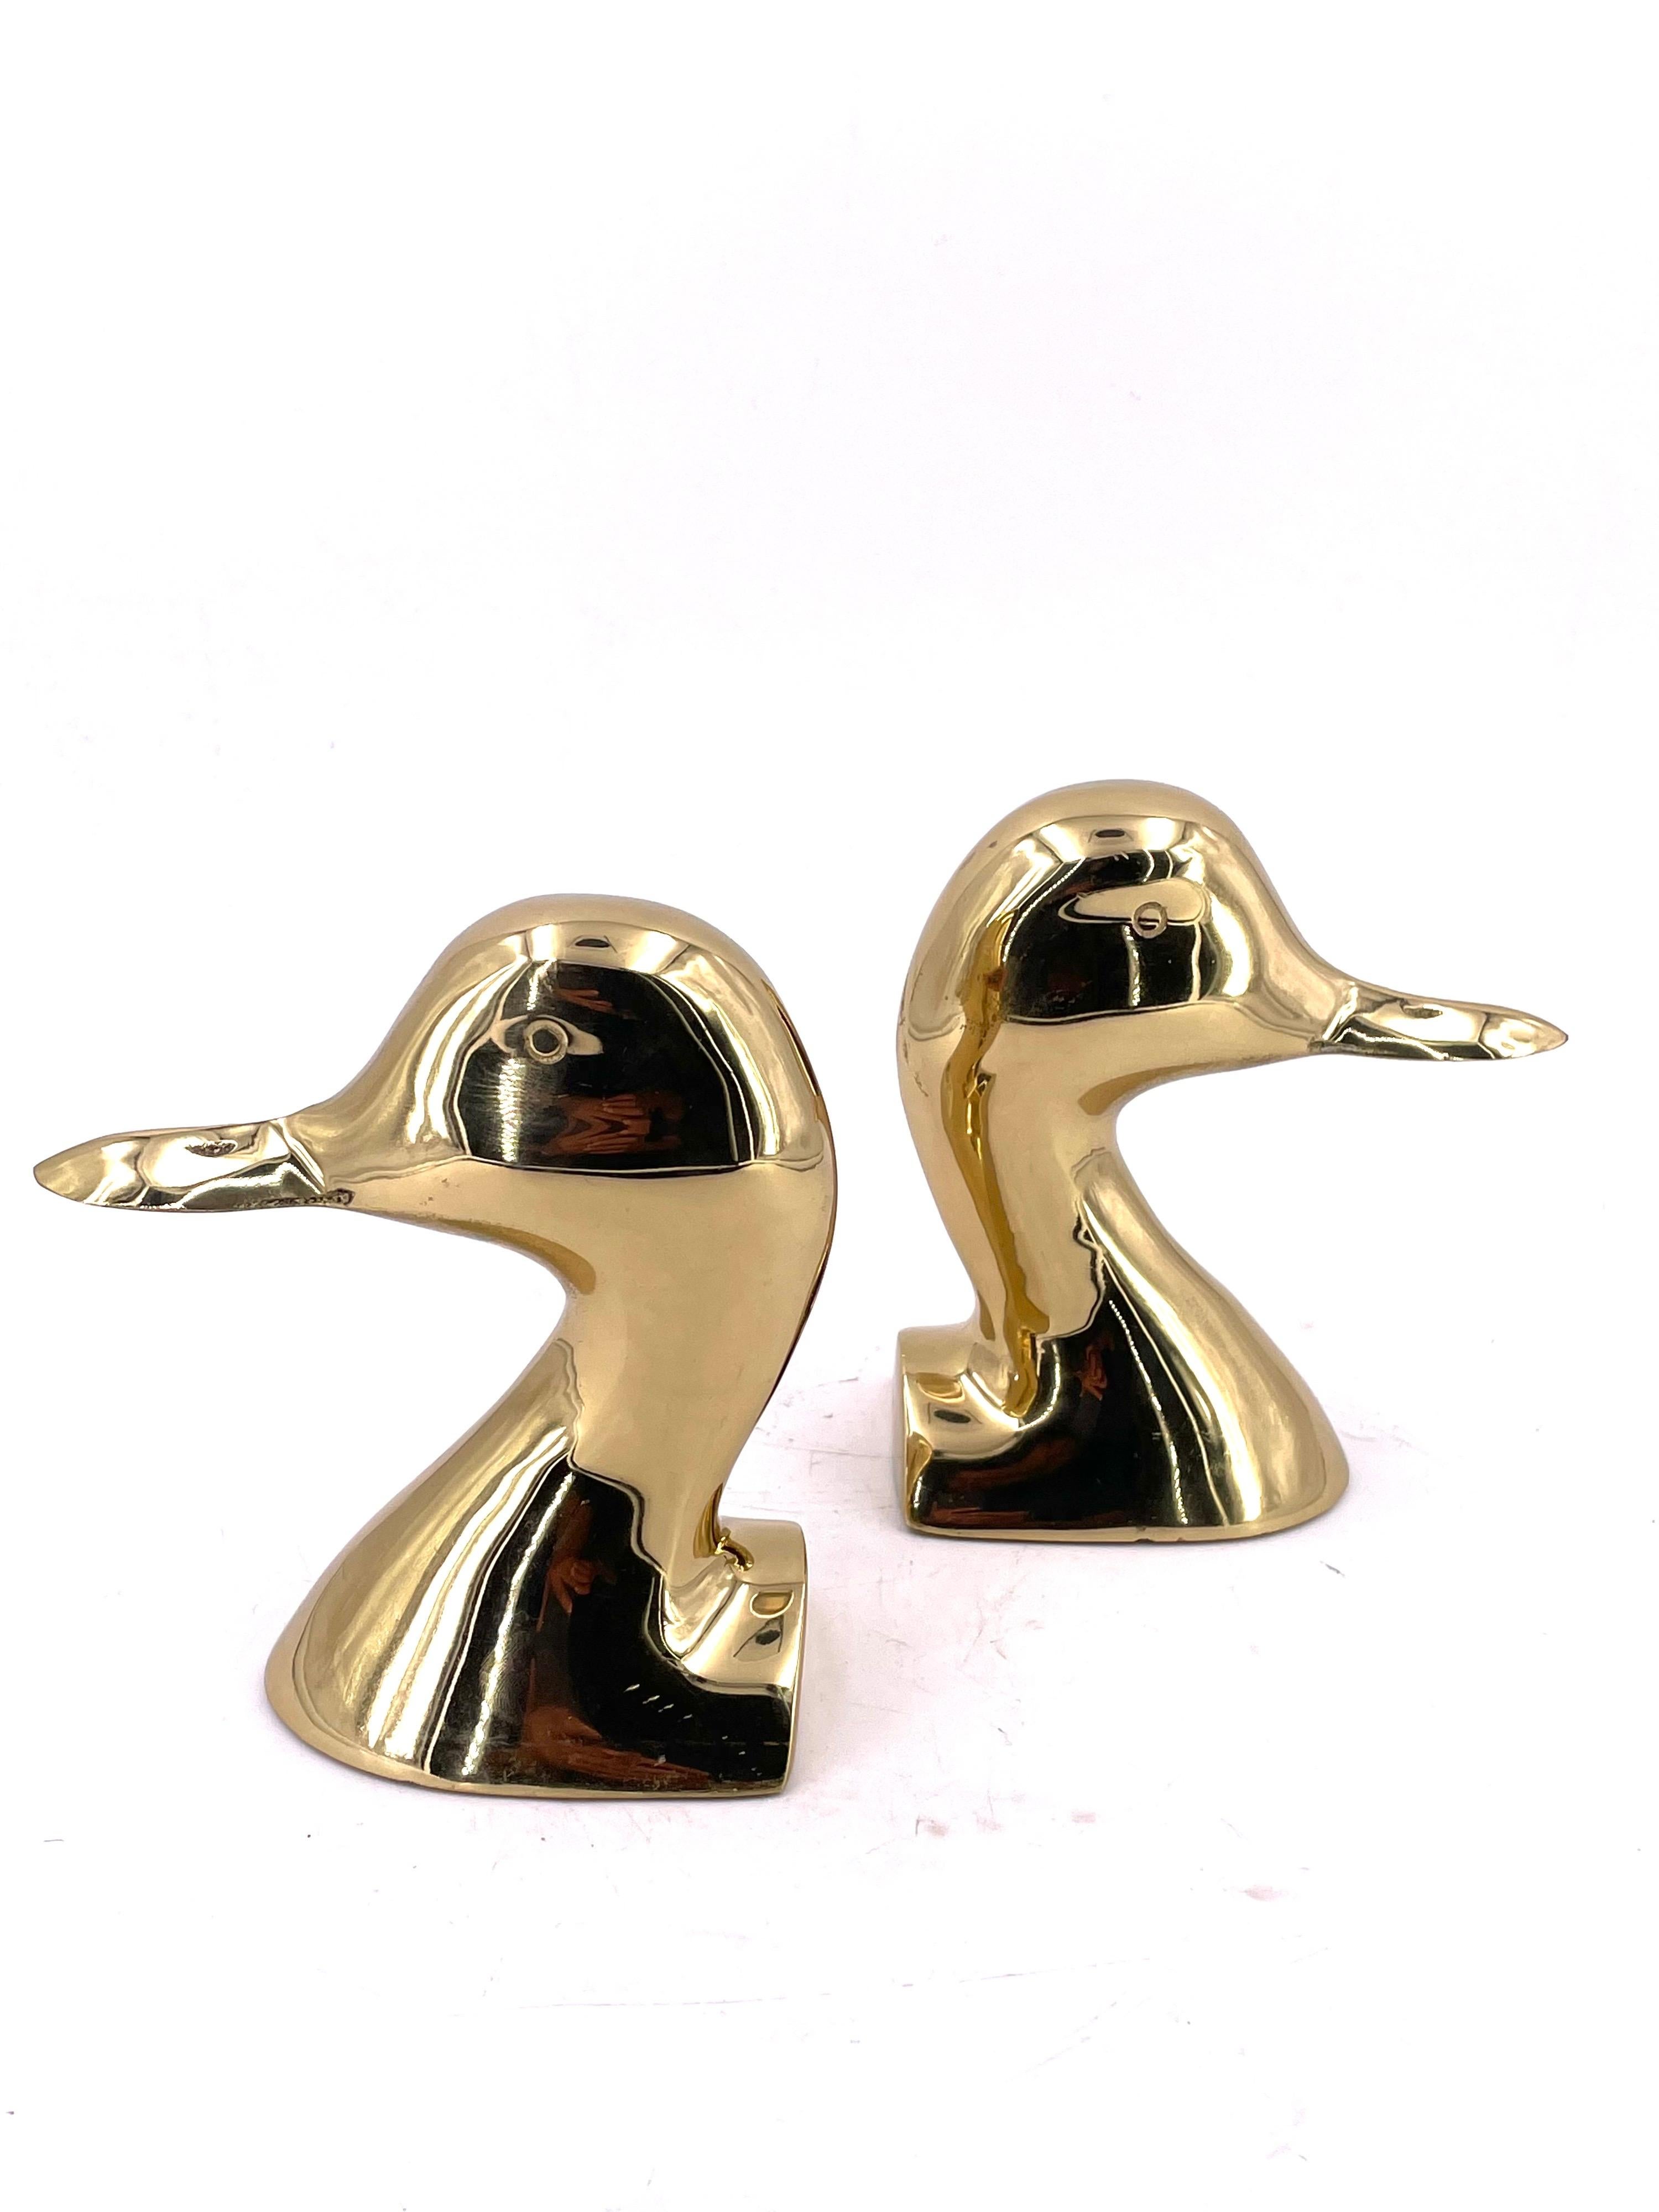 Nicely light polished brass bookends, duck heads, circa the 1970s. Stamped Made in the USA solid and heavy quality.